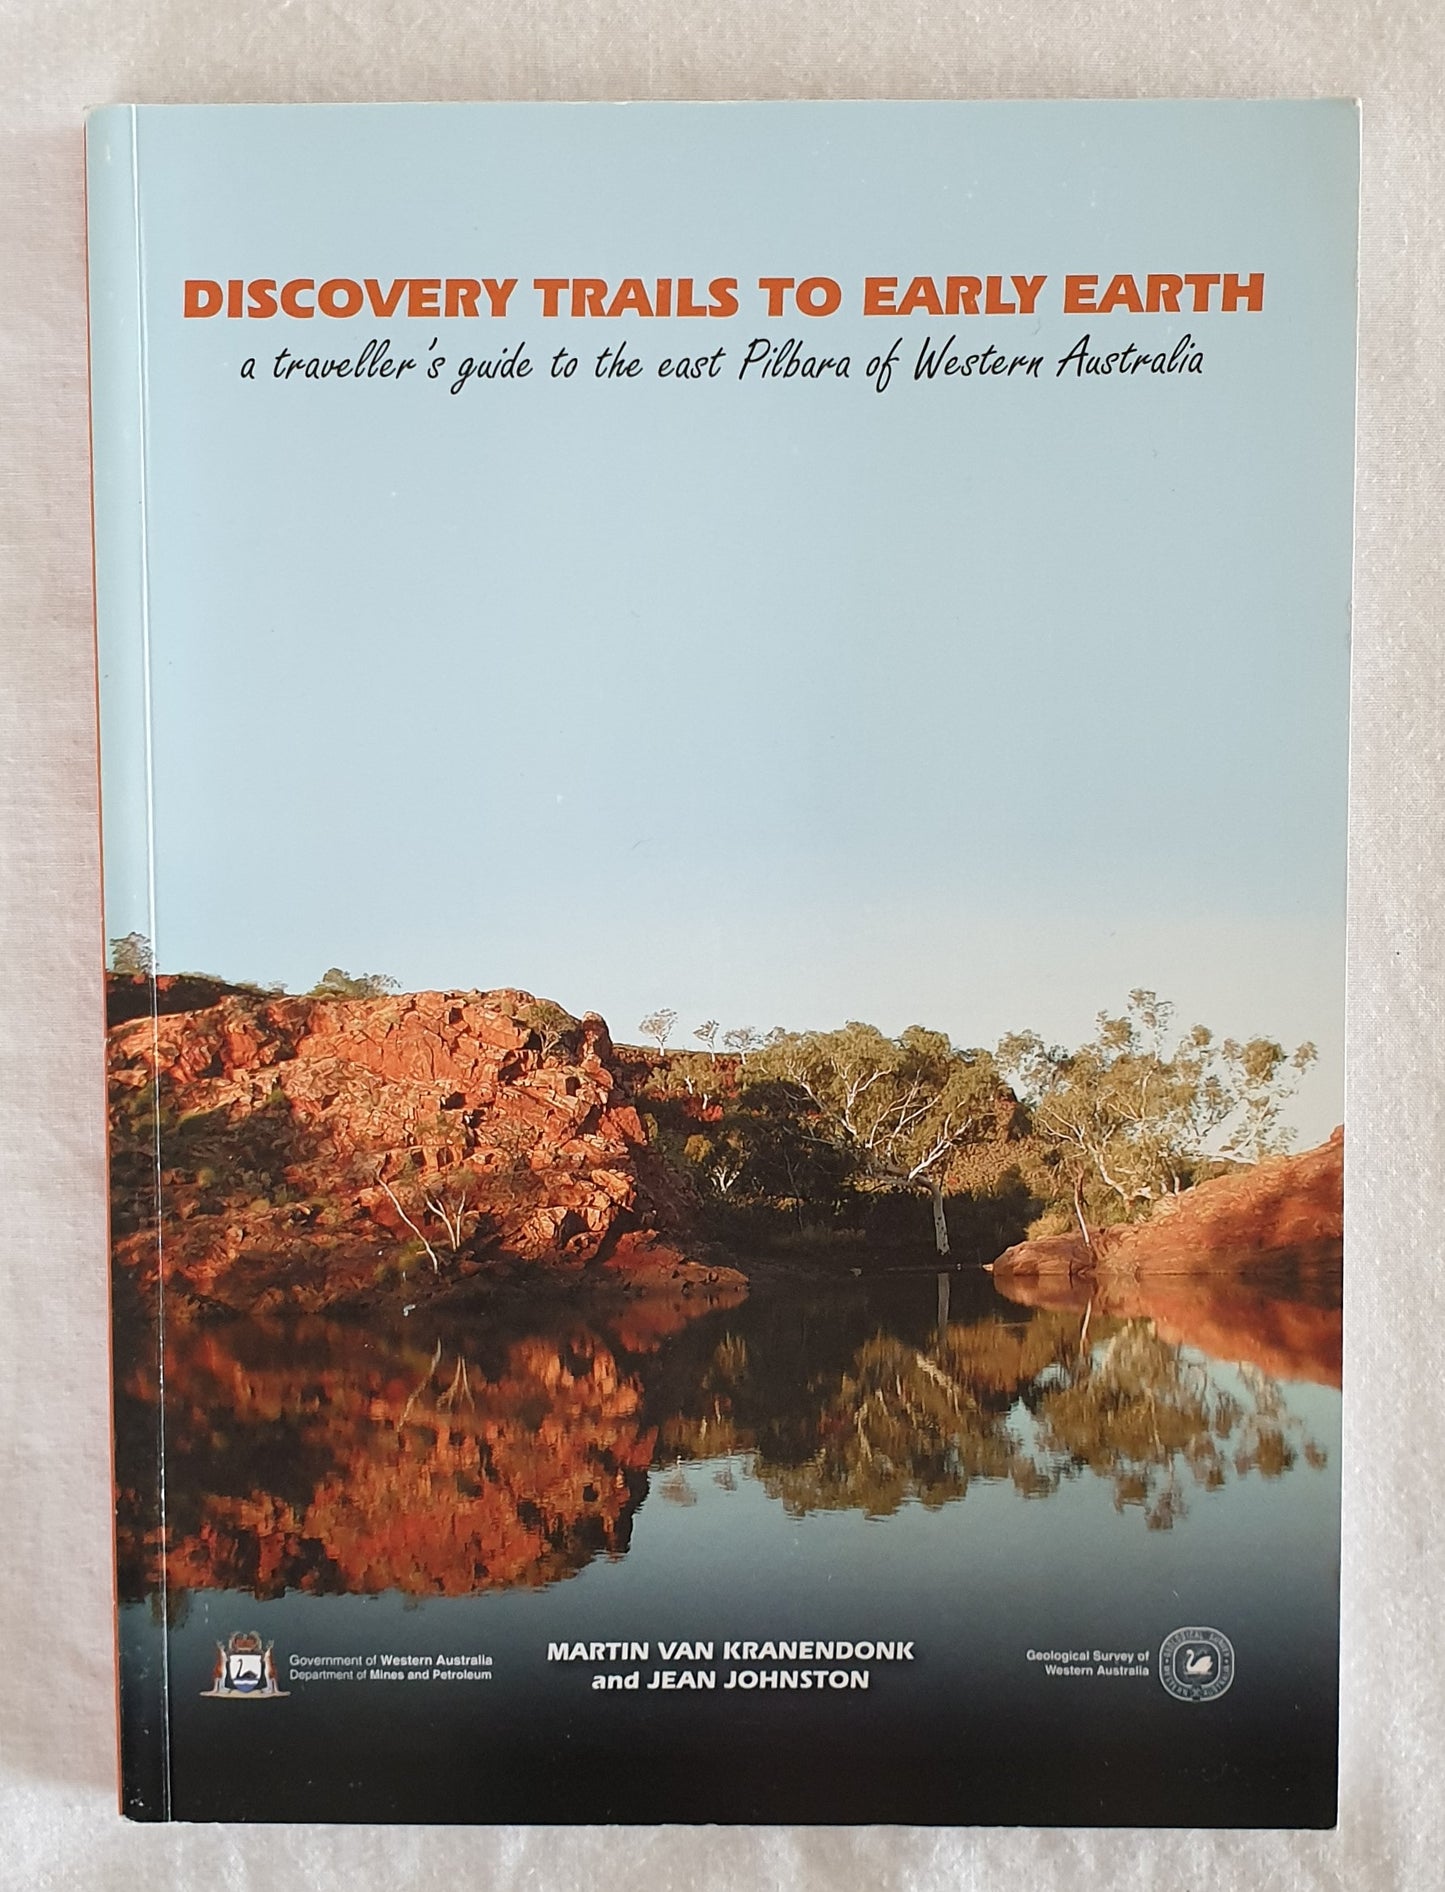 Discovery Trails to Early Earth by Martin Van Kranendonk and Jean Johnston